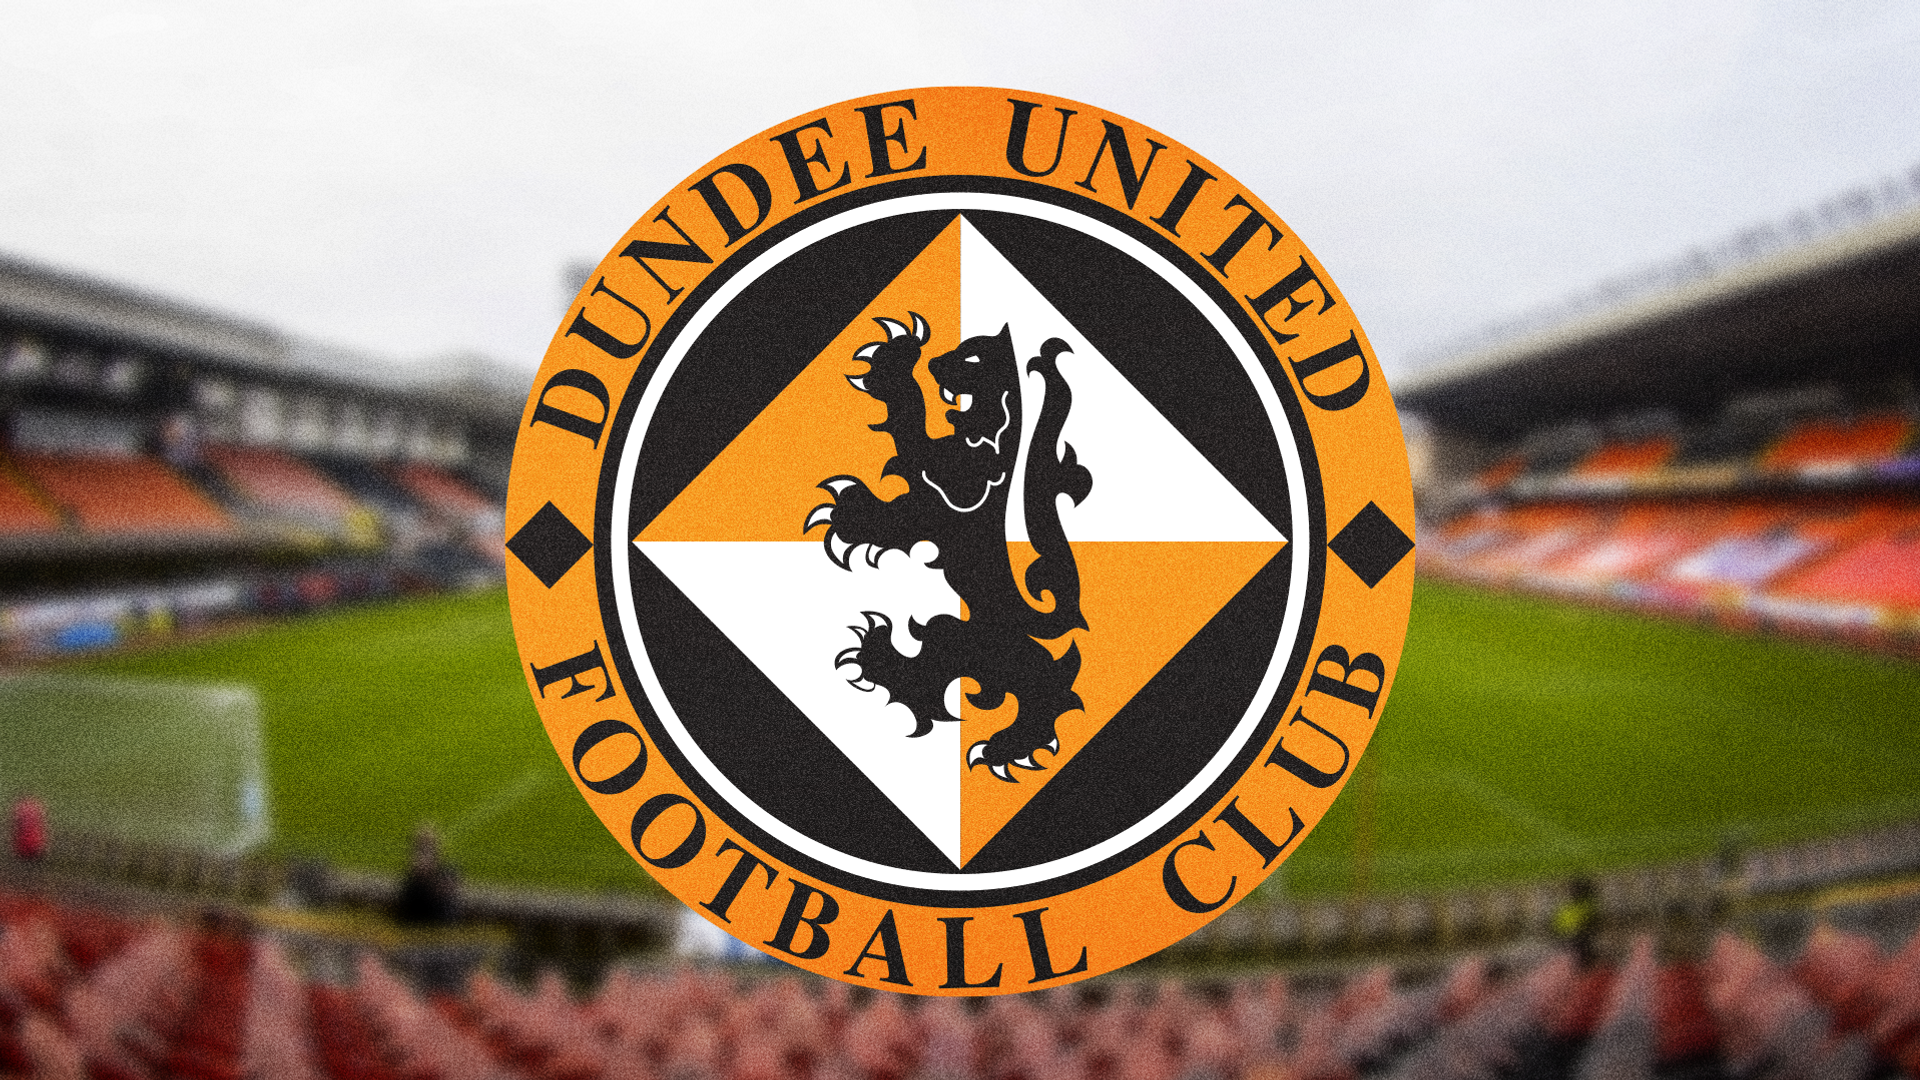 Dundee United's fixtures: Newly-promoted Kilmarnock first up